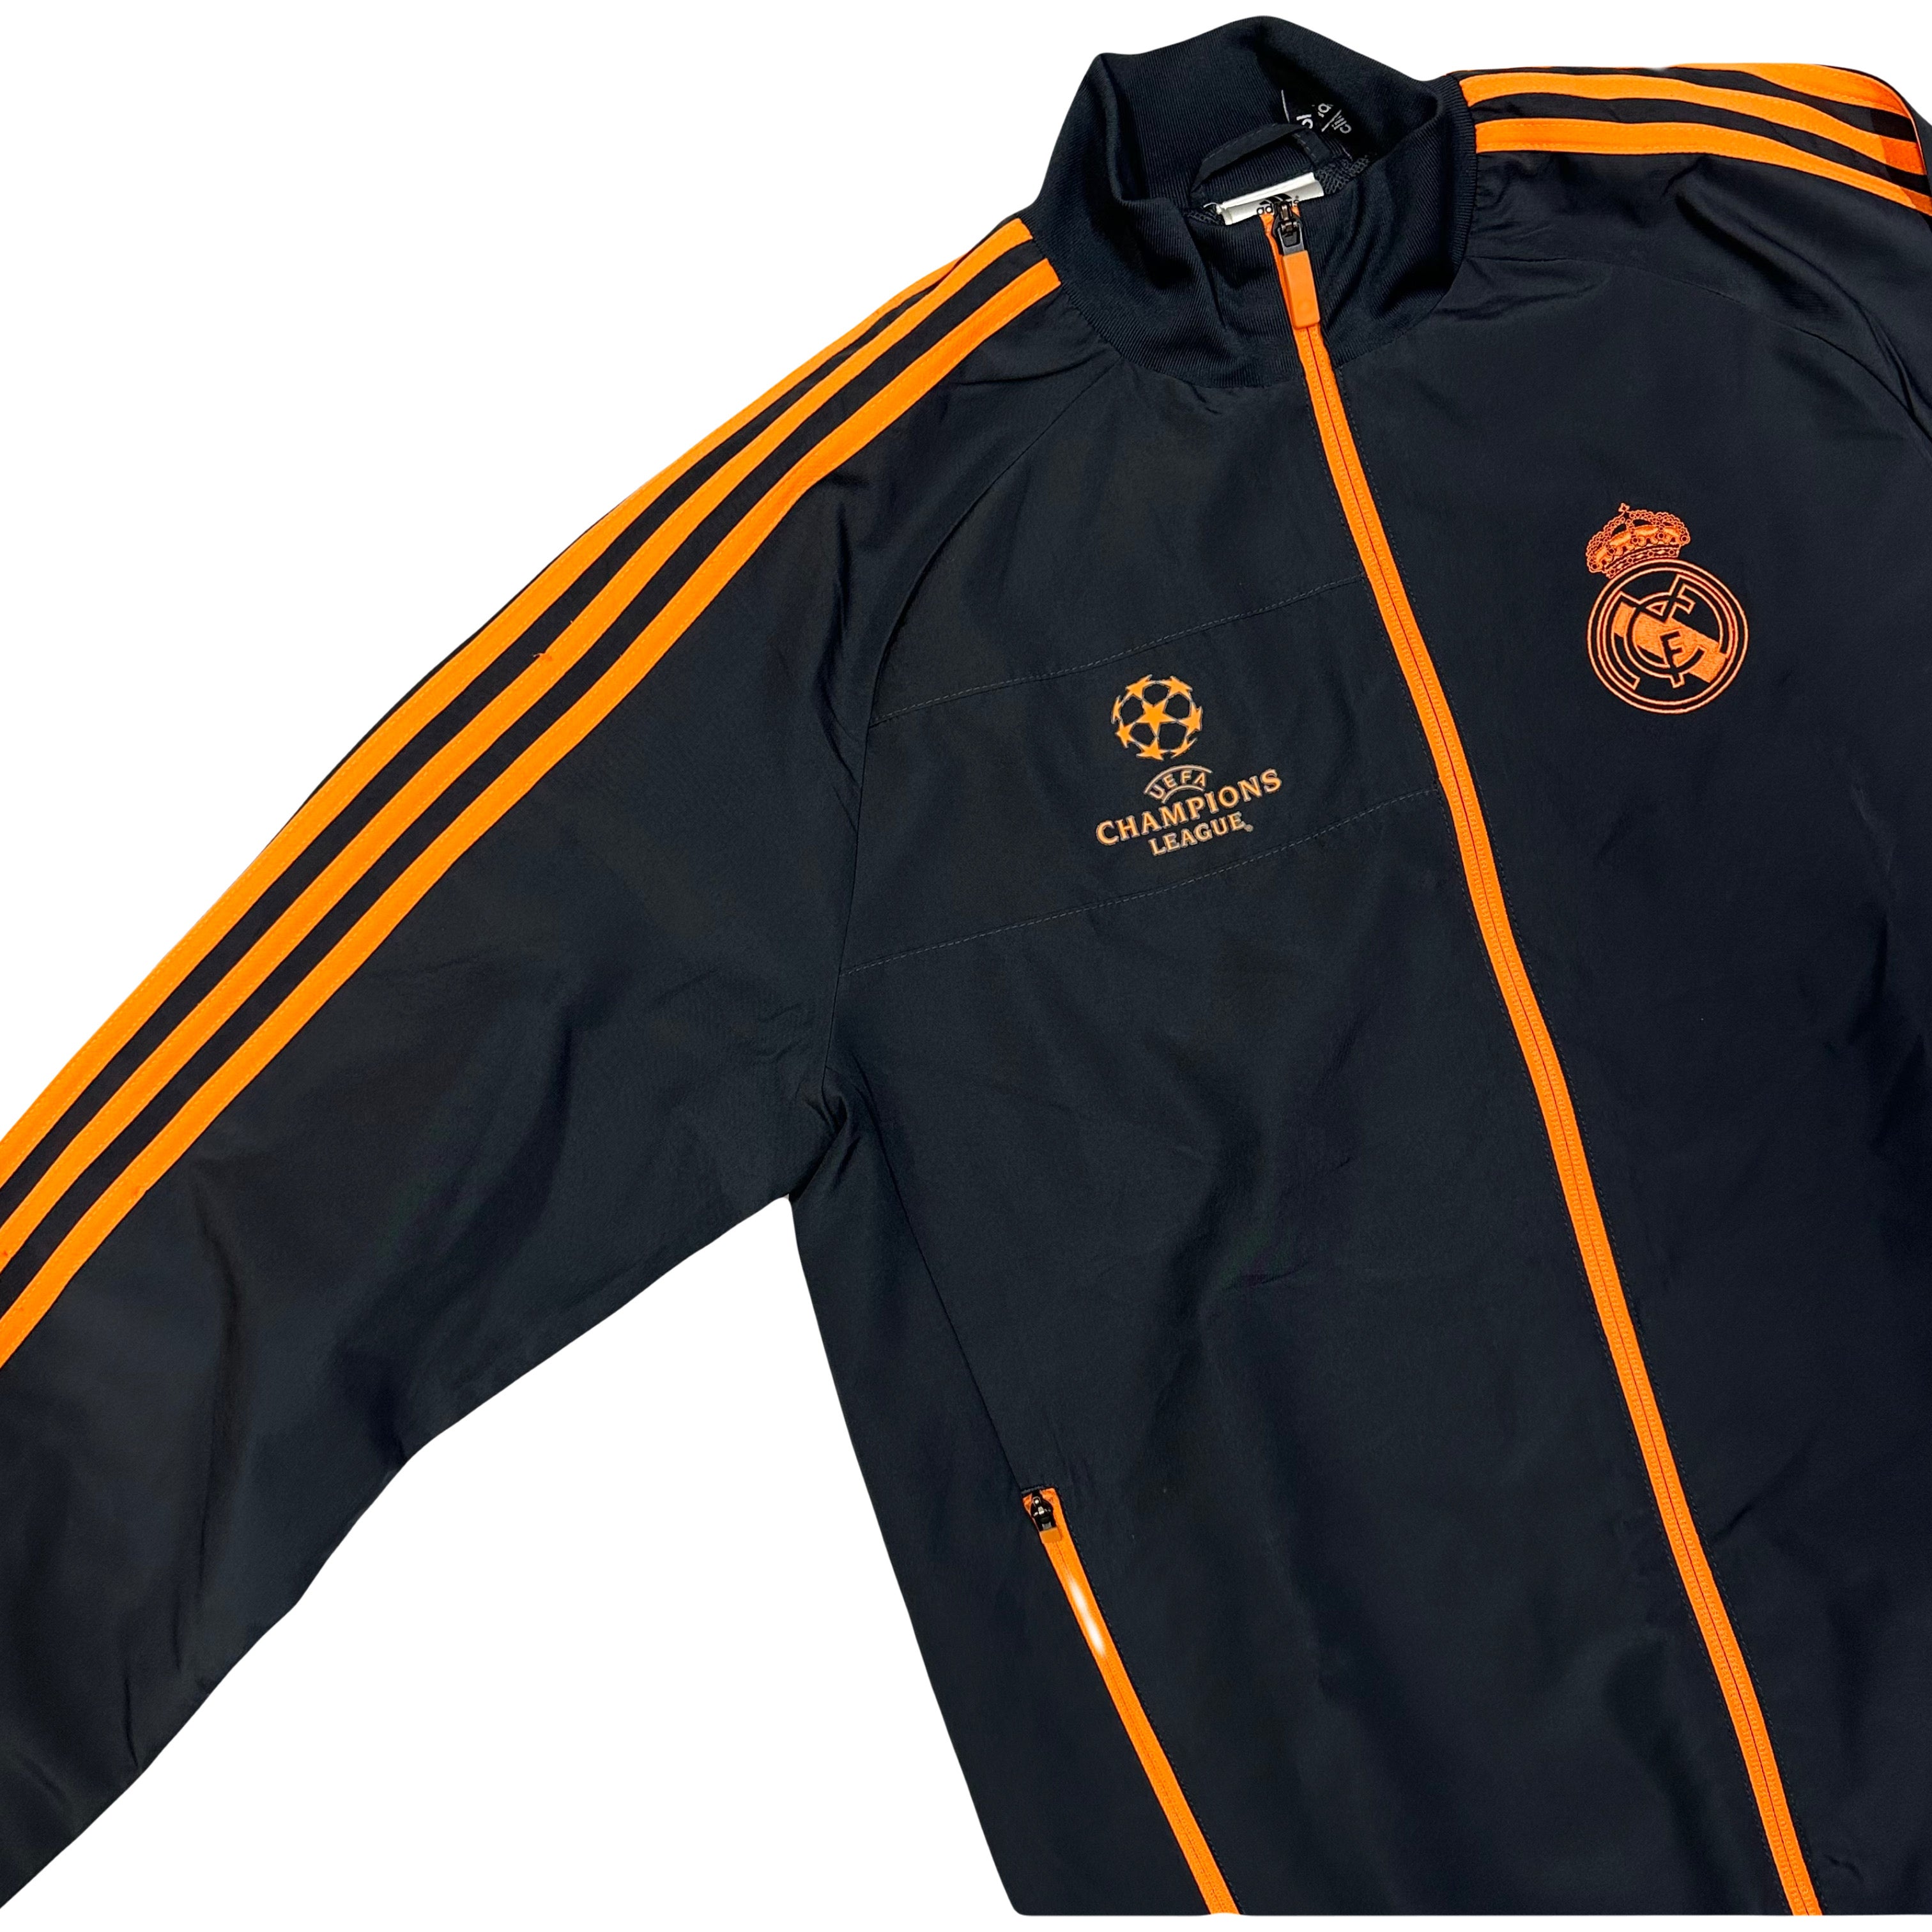 Adidas Real Madrid 2013/14 Tracksuit Top ( S )